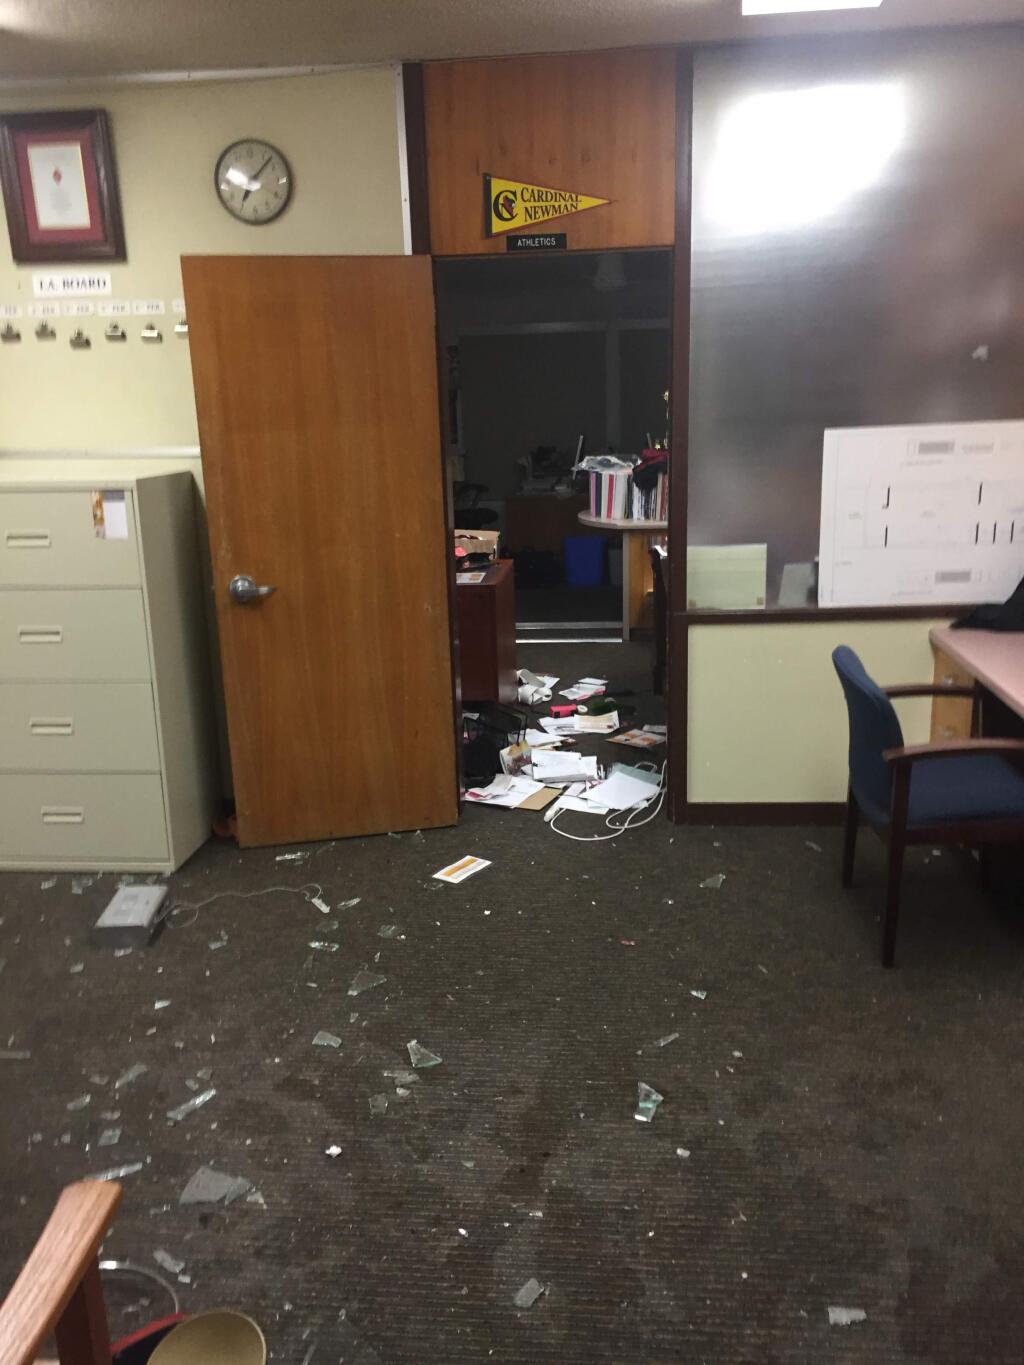 A suspected vandal demolished windows, toppled statues and trashed the administration office at Cardinal Newman High School in Santa Rosa, causing more than $100,000 in damage, Monday, Dec. 19, 2016. (SUBMITTED PHOTO)